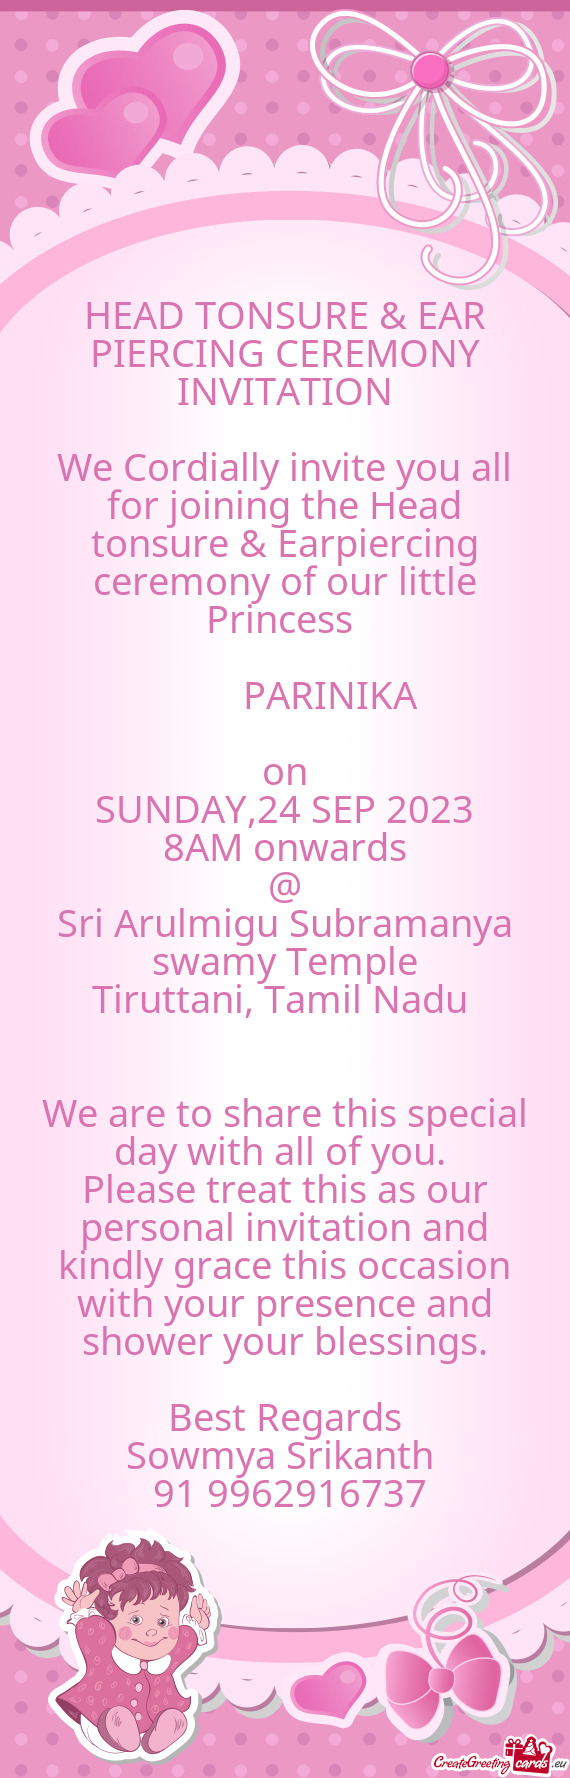 We Cordially invite you all for joining the Head tonsure & Earpiercing ceremony of our little Prince